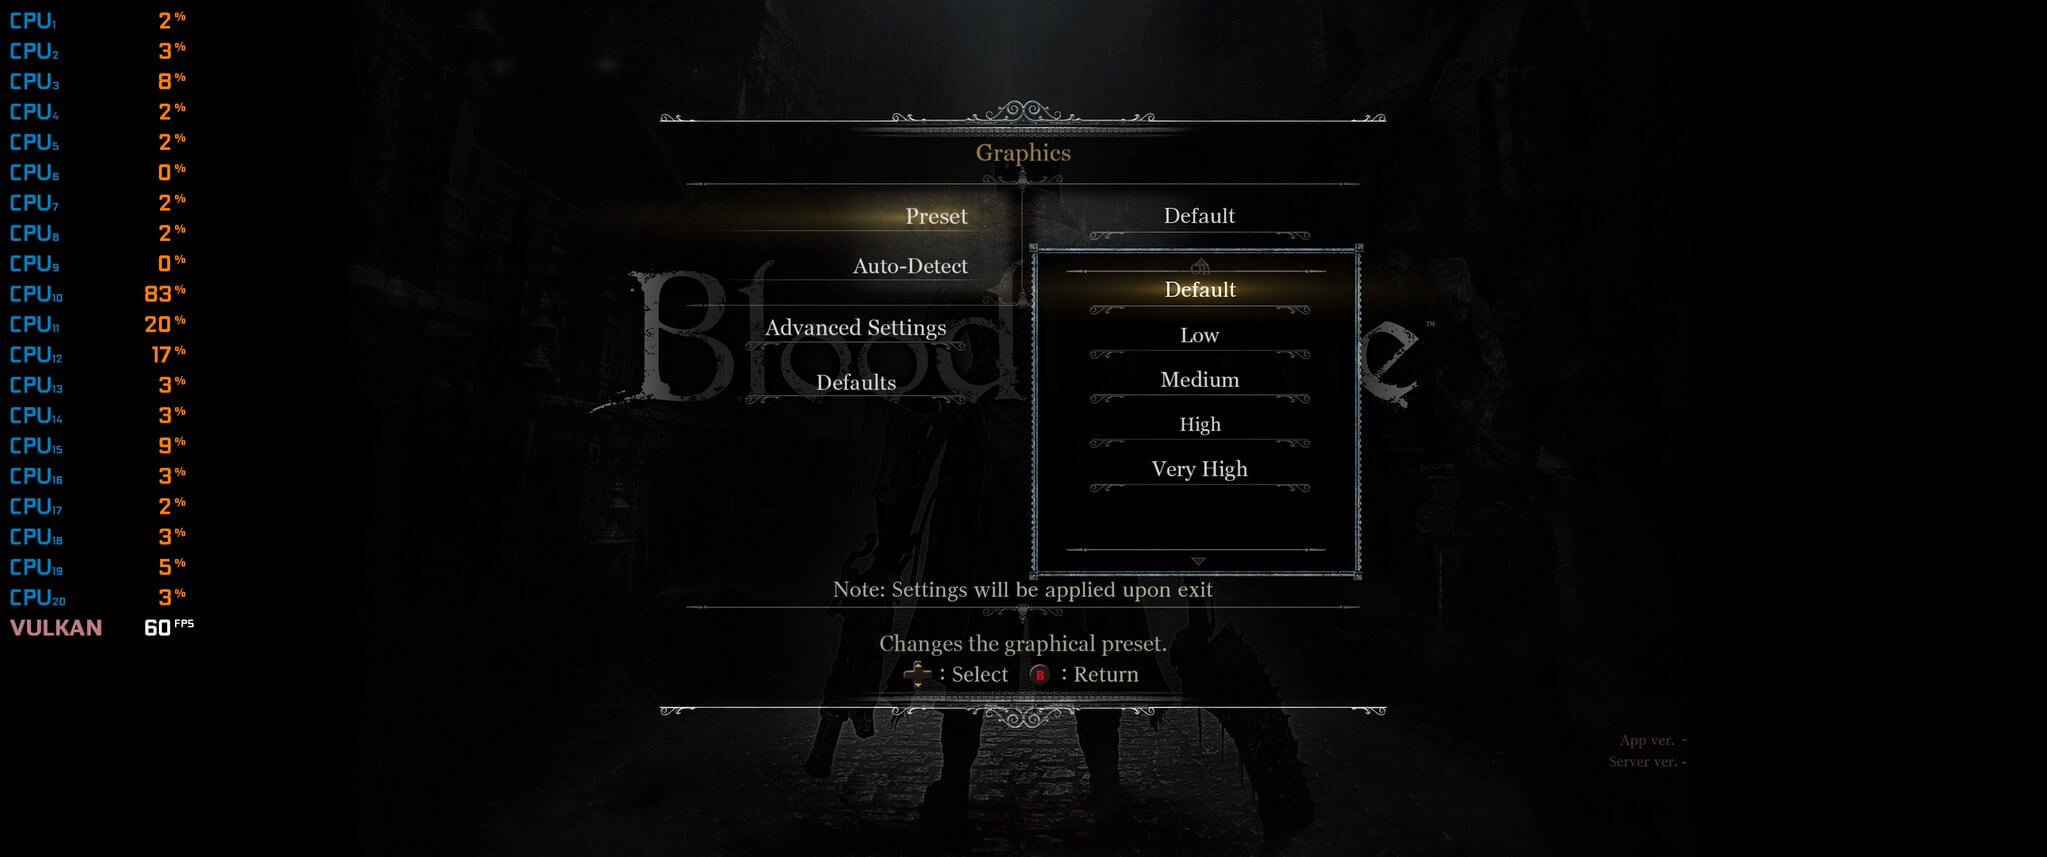 New Bloodborne PC rumors surface, as industry insiders hint at the game  finally coming to the PC - DSOGaming : r/pcgaming